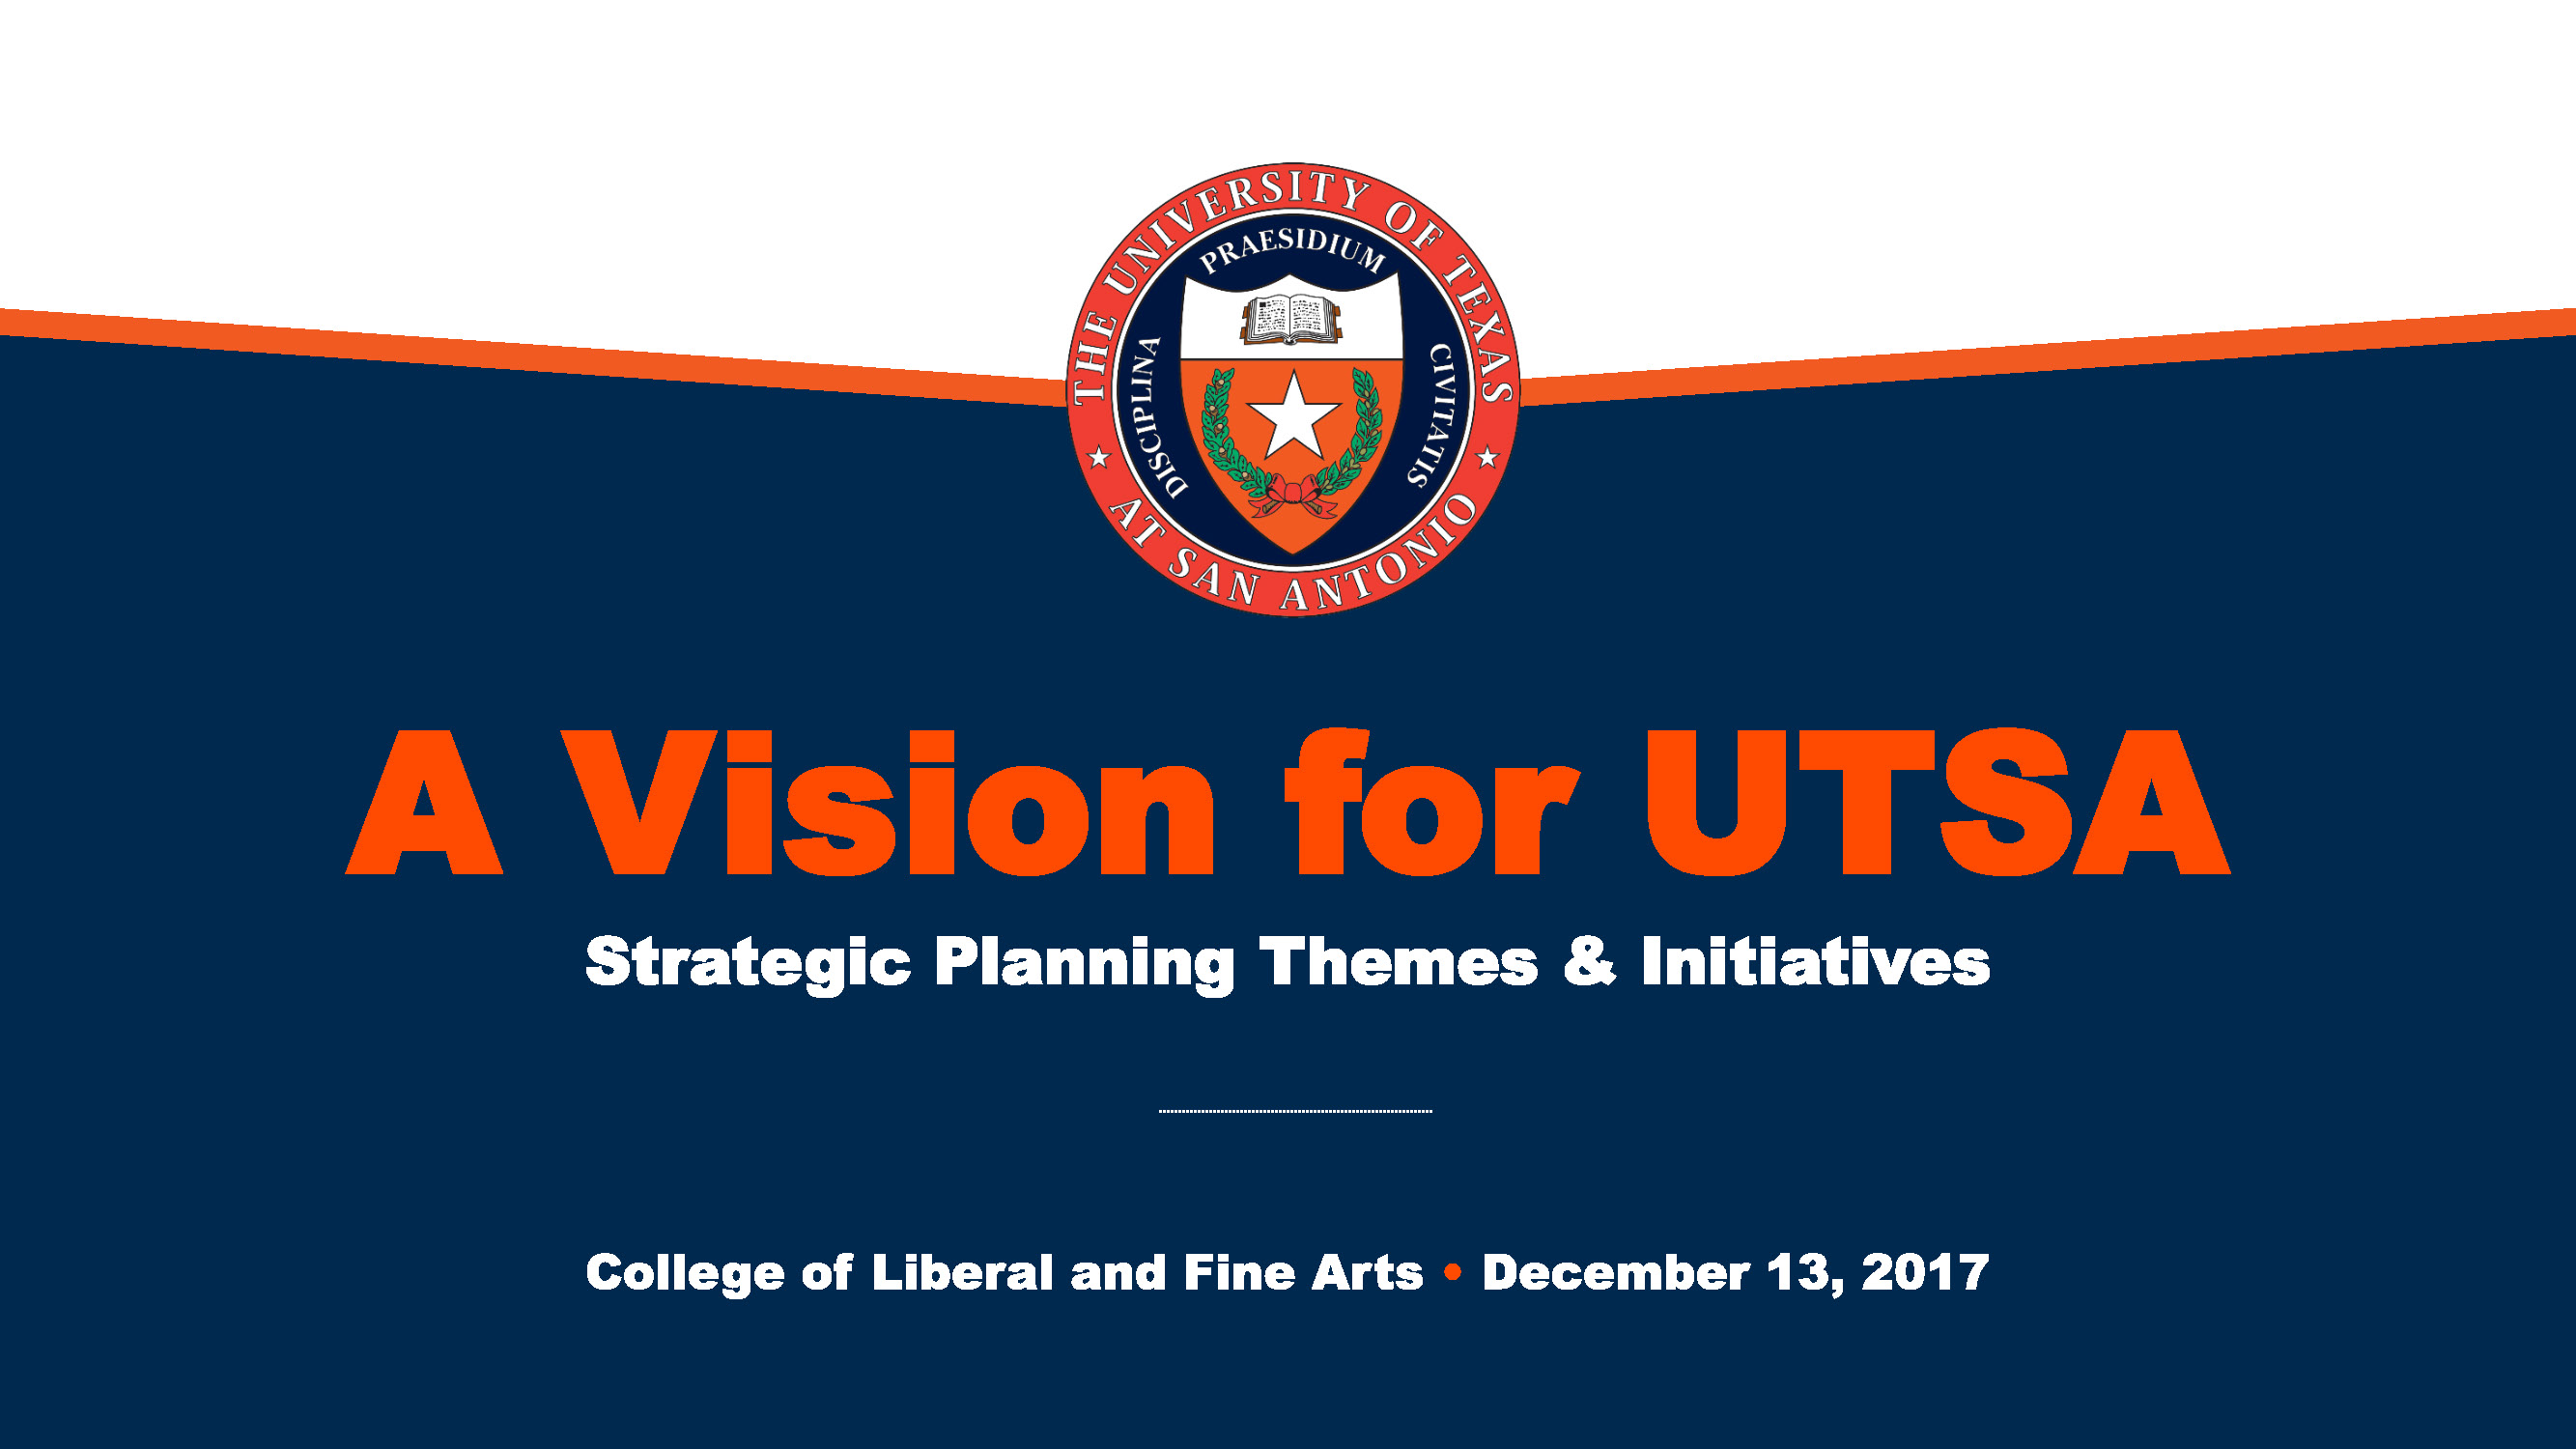 Campus Conversation 1.0: Presentation to the College of Liberal and Fine Arts